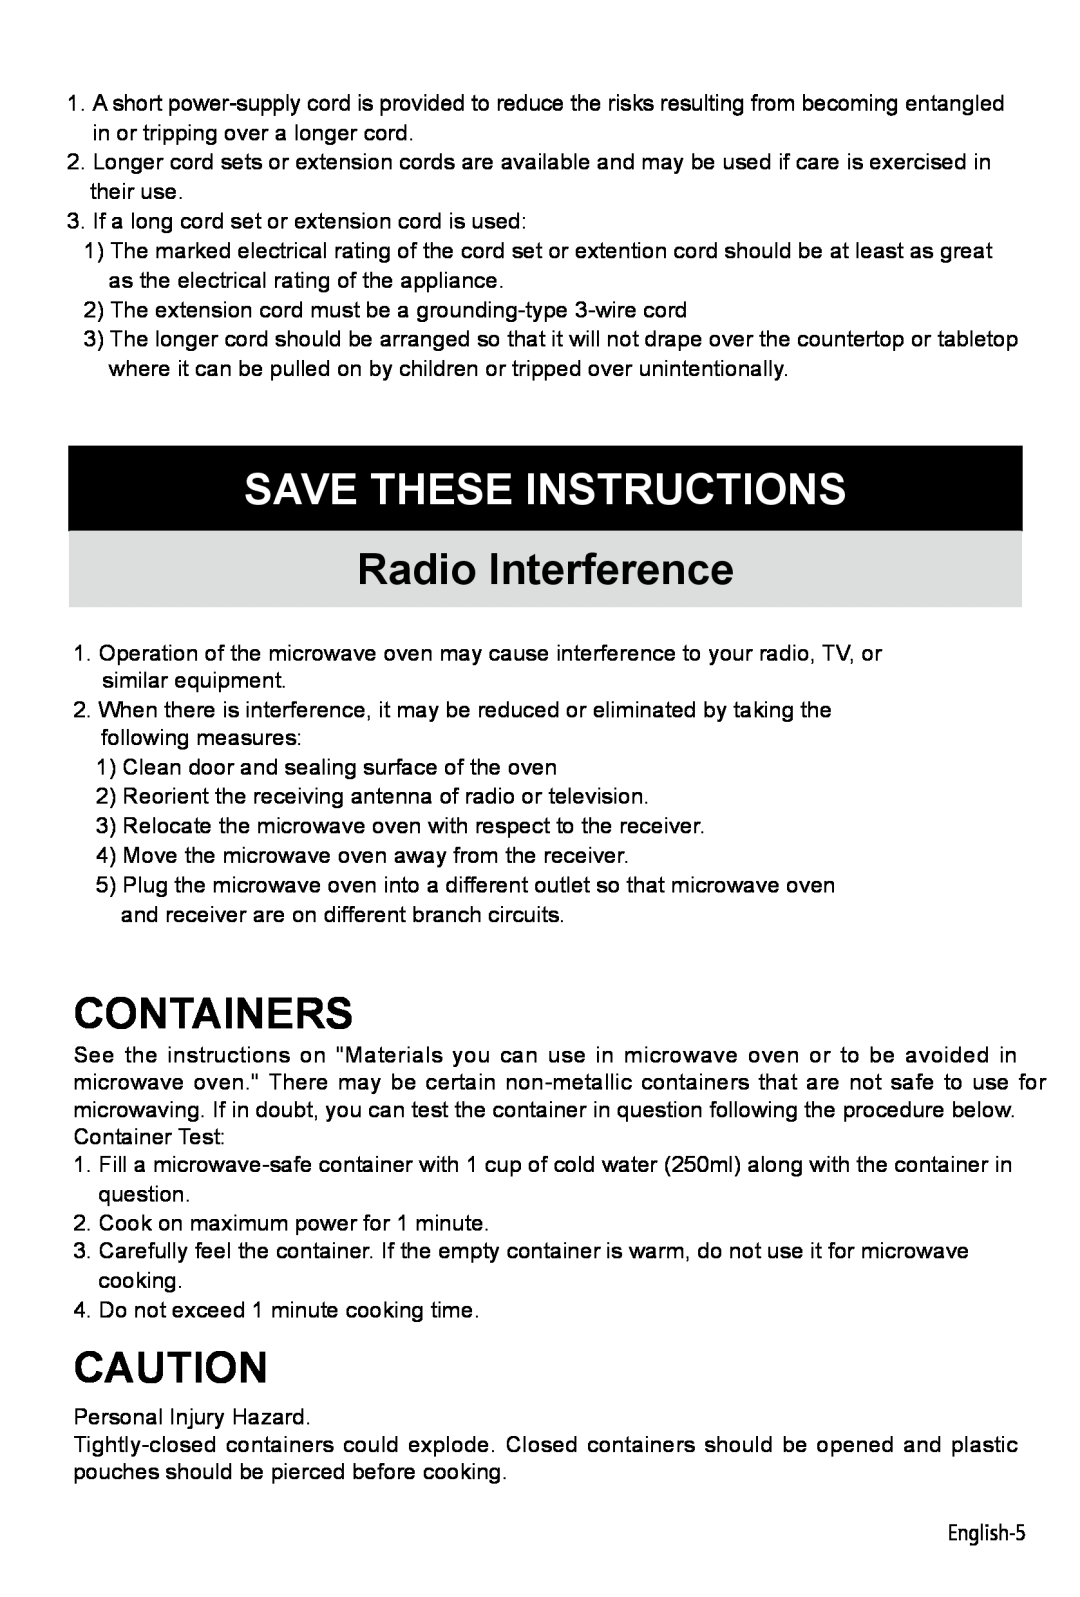 West Bend AG028PLV manual Save These Instructions, Radio Interference, Containers 